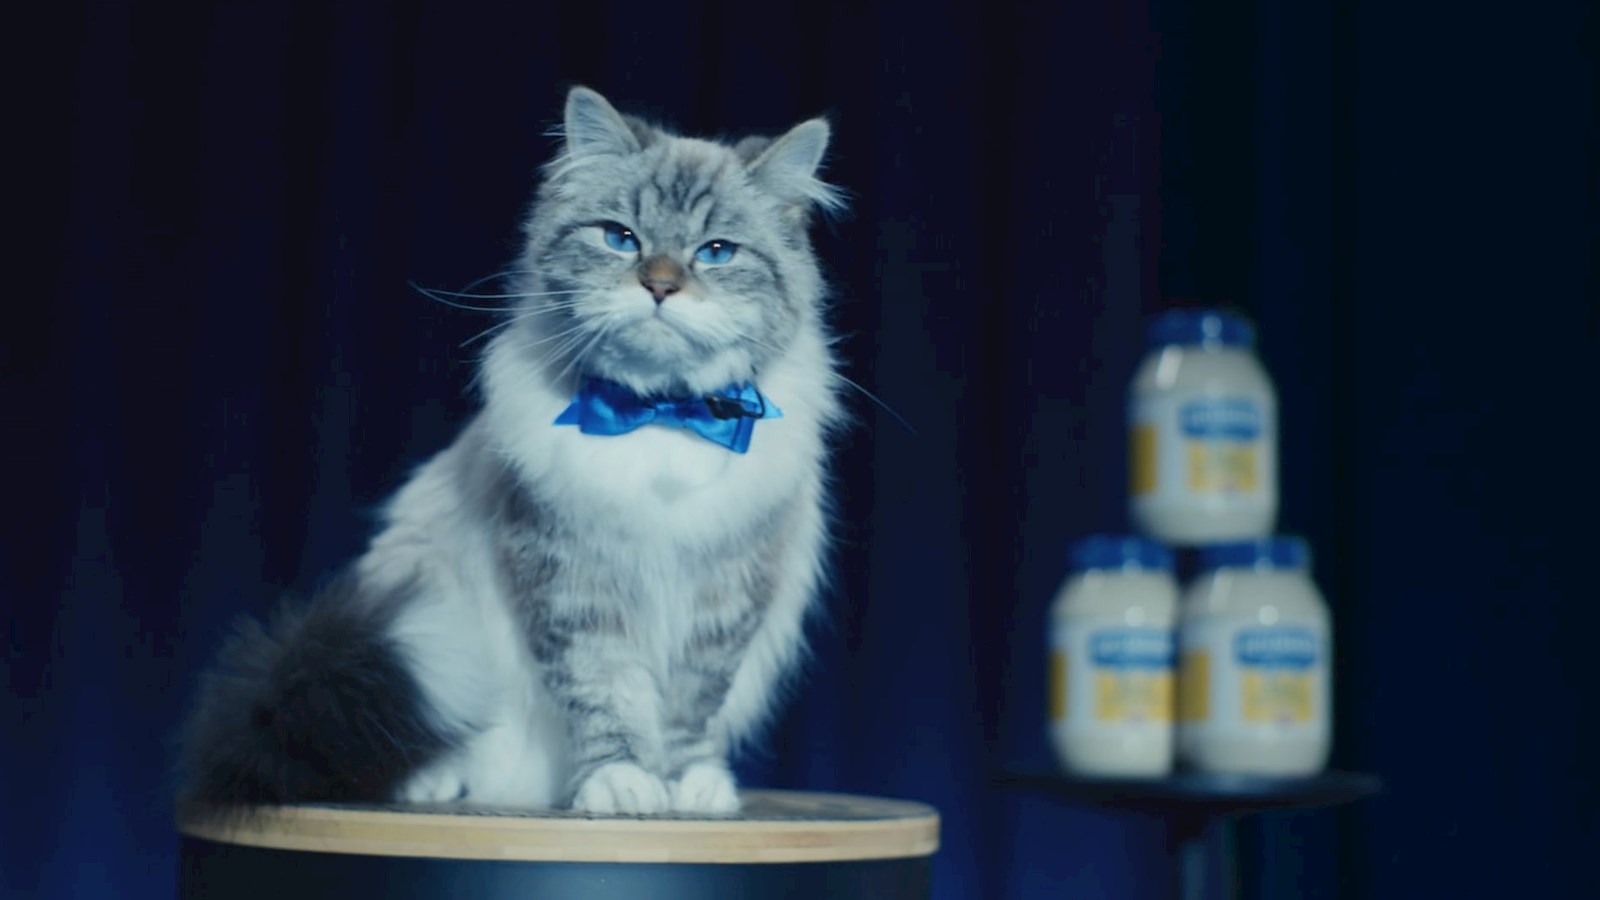 Grey and white cat called "Mayocat" wearing a bow tie sitting on a stage with 3 jars of mayonnaise in the background